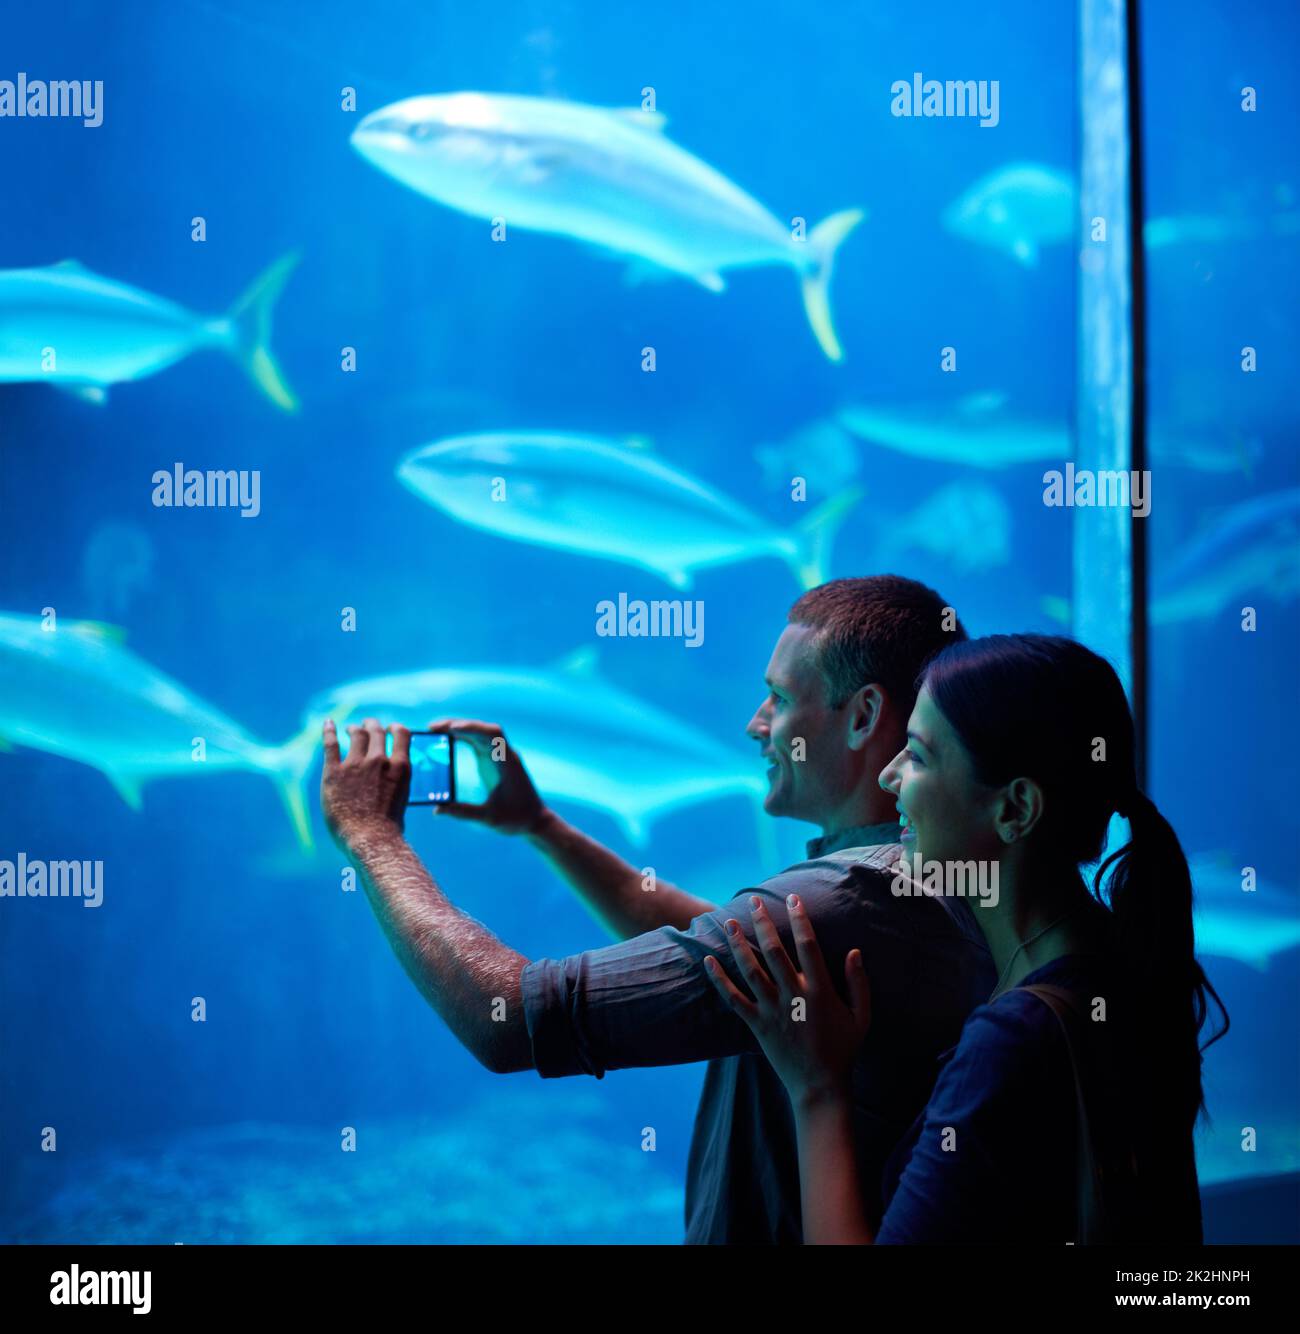 Capturing marine memories. Shot of a young couple taking a snapshot of the fish in an aquarium. Stock Photo